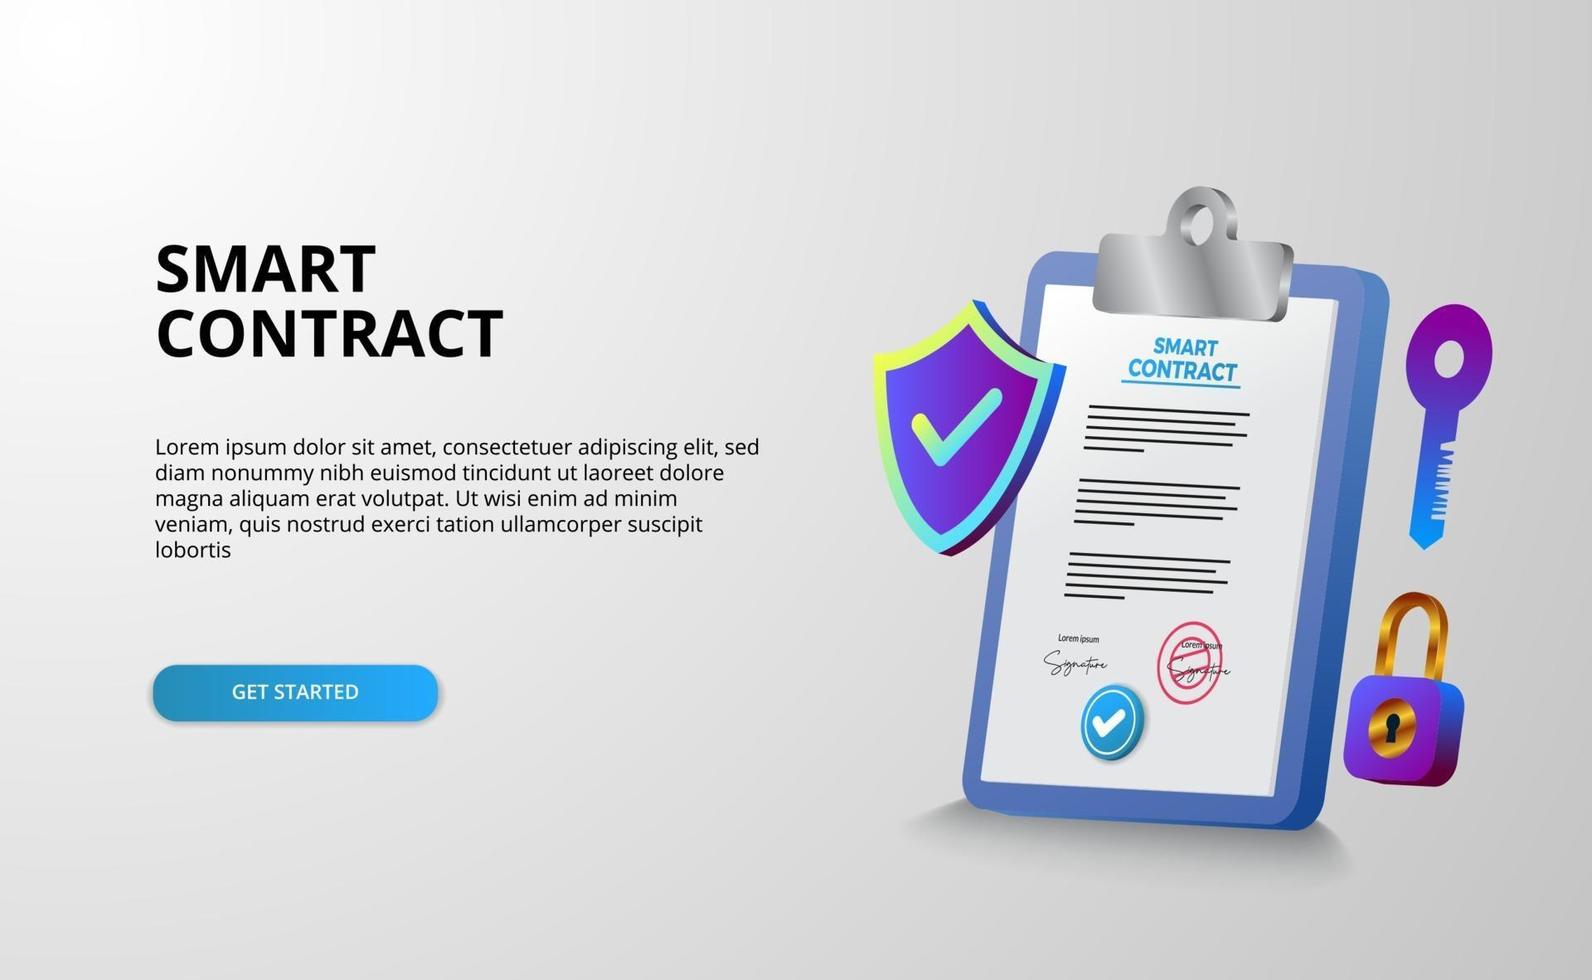 Digital smart contract for electronic sign document agreement security, finance, legal corporate. Clipboard document illustration with shield protection security vector